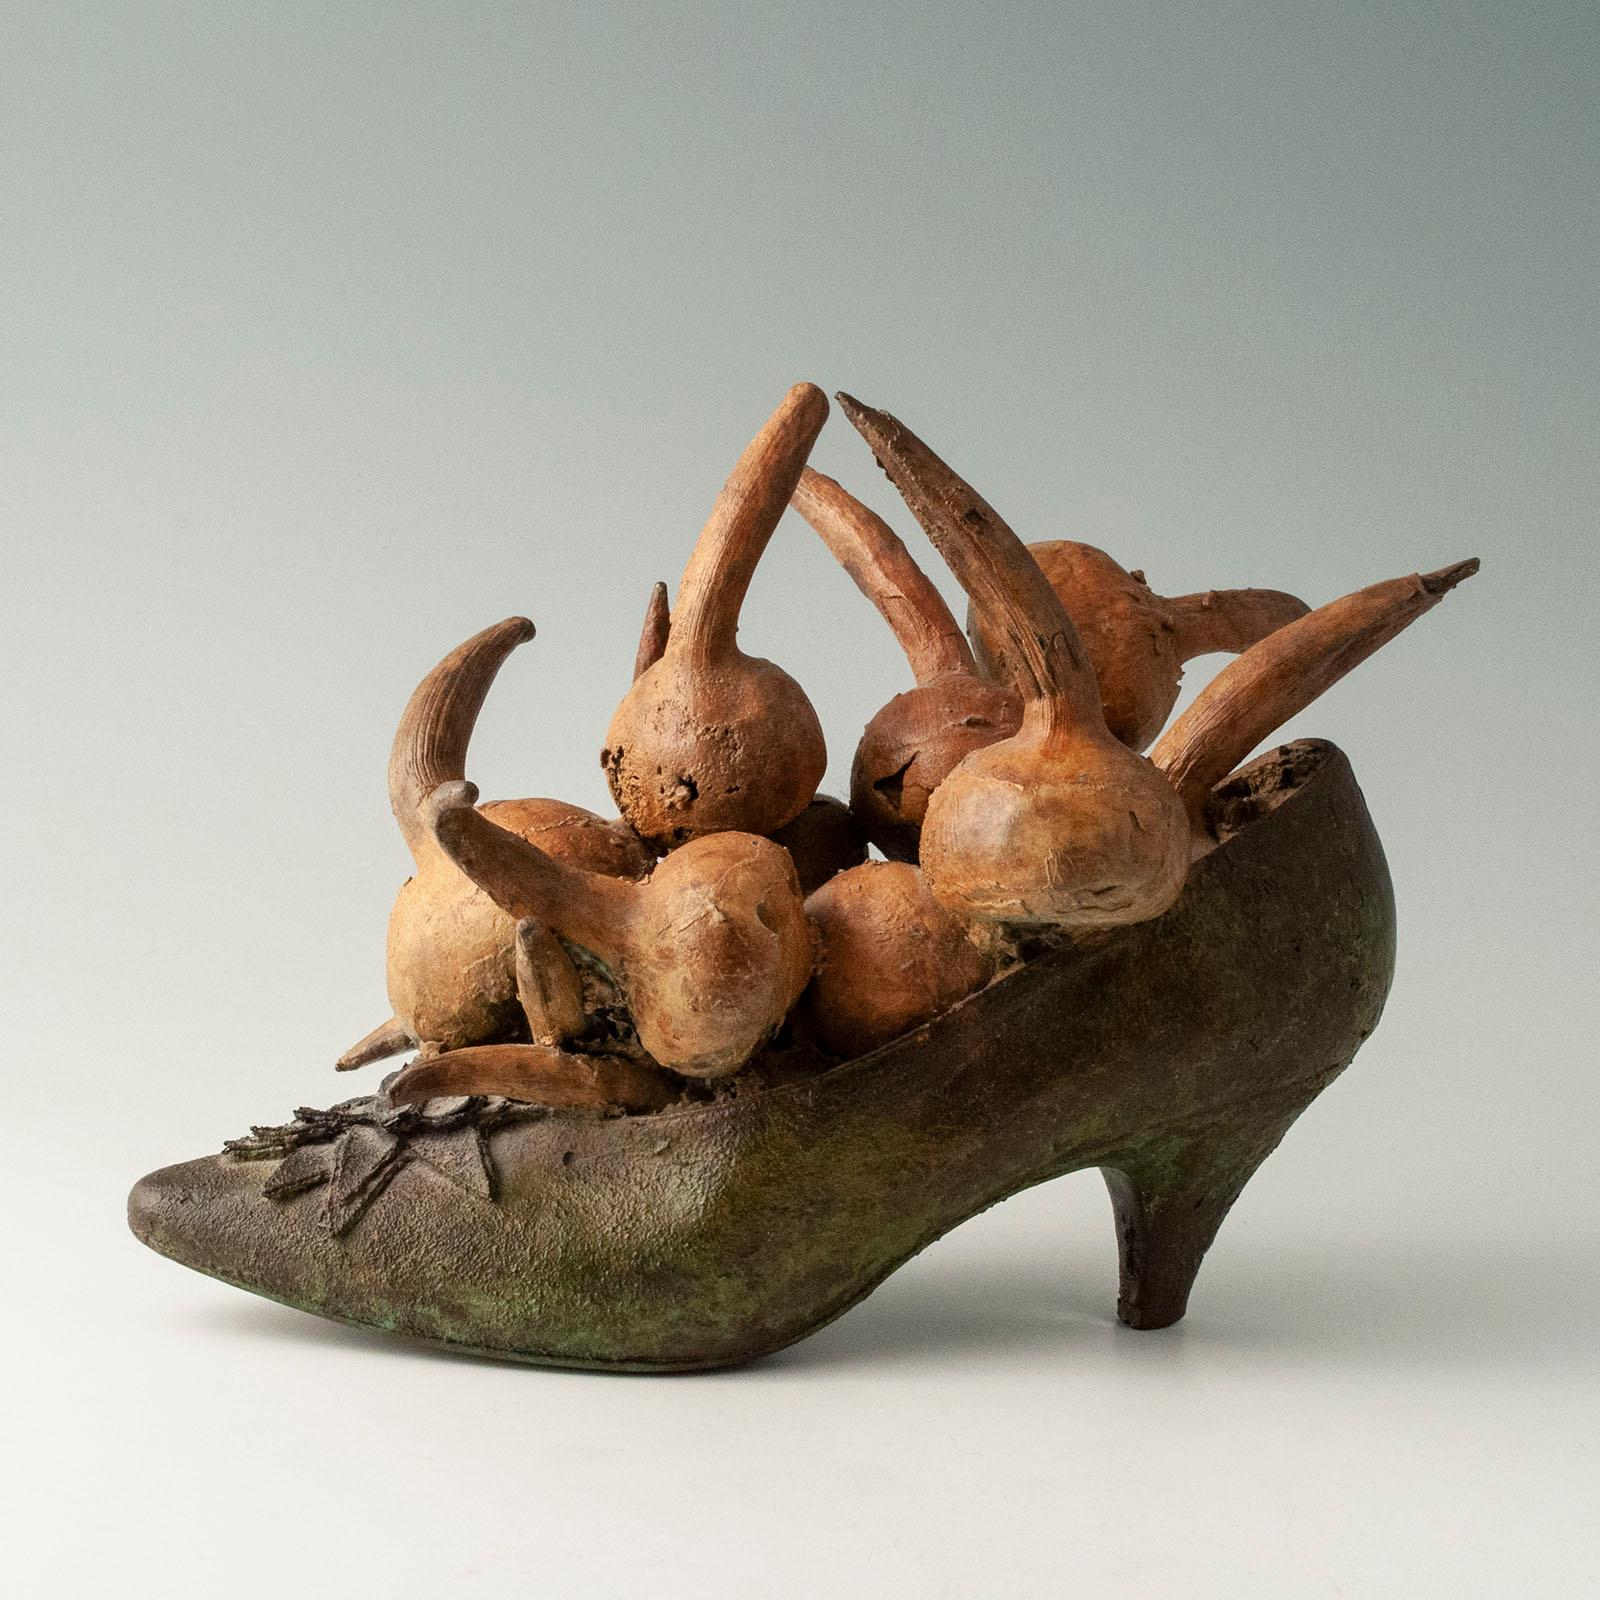 Steve Tobin (b. 1957) is an American sculptor who works primarily in bronze, steel, clay and glass. This whimsical cast bronze shoe with onions is from a series of 100 that he cast containing various vegetables, fruit and other food stuffs. It